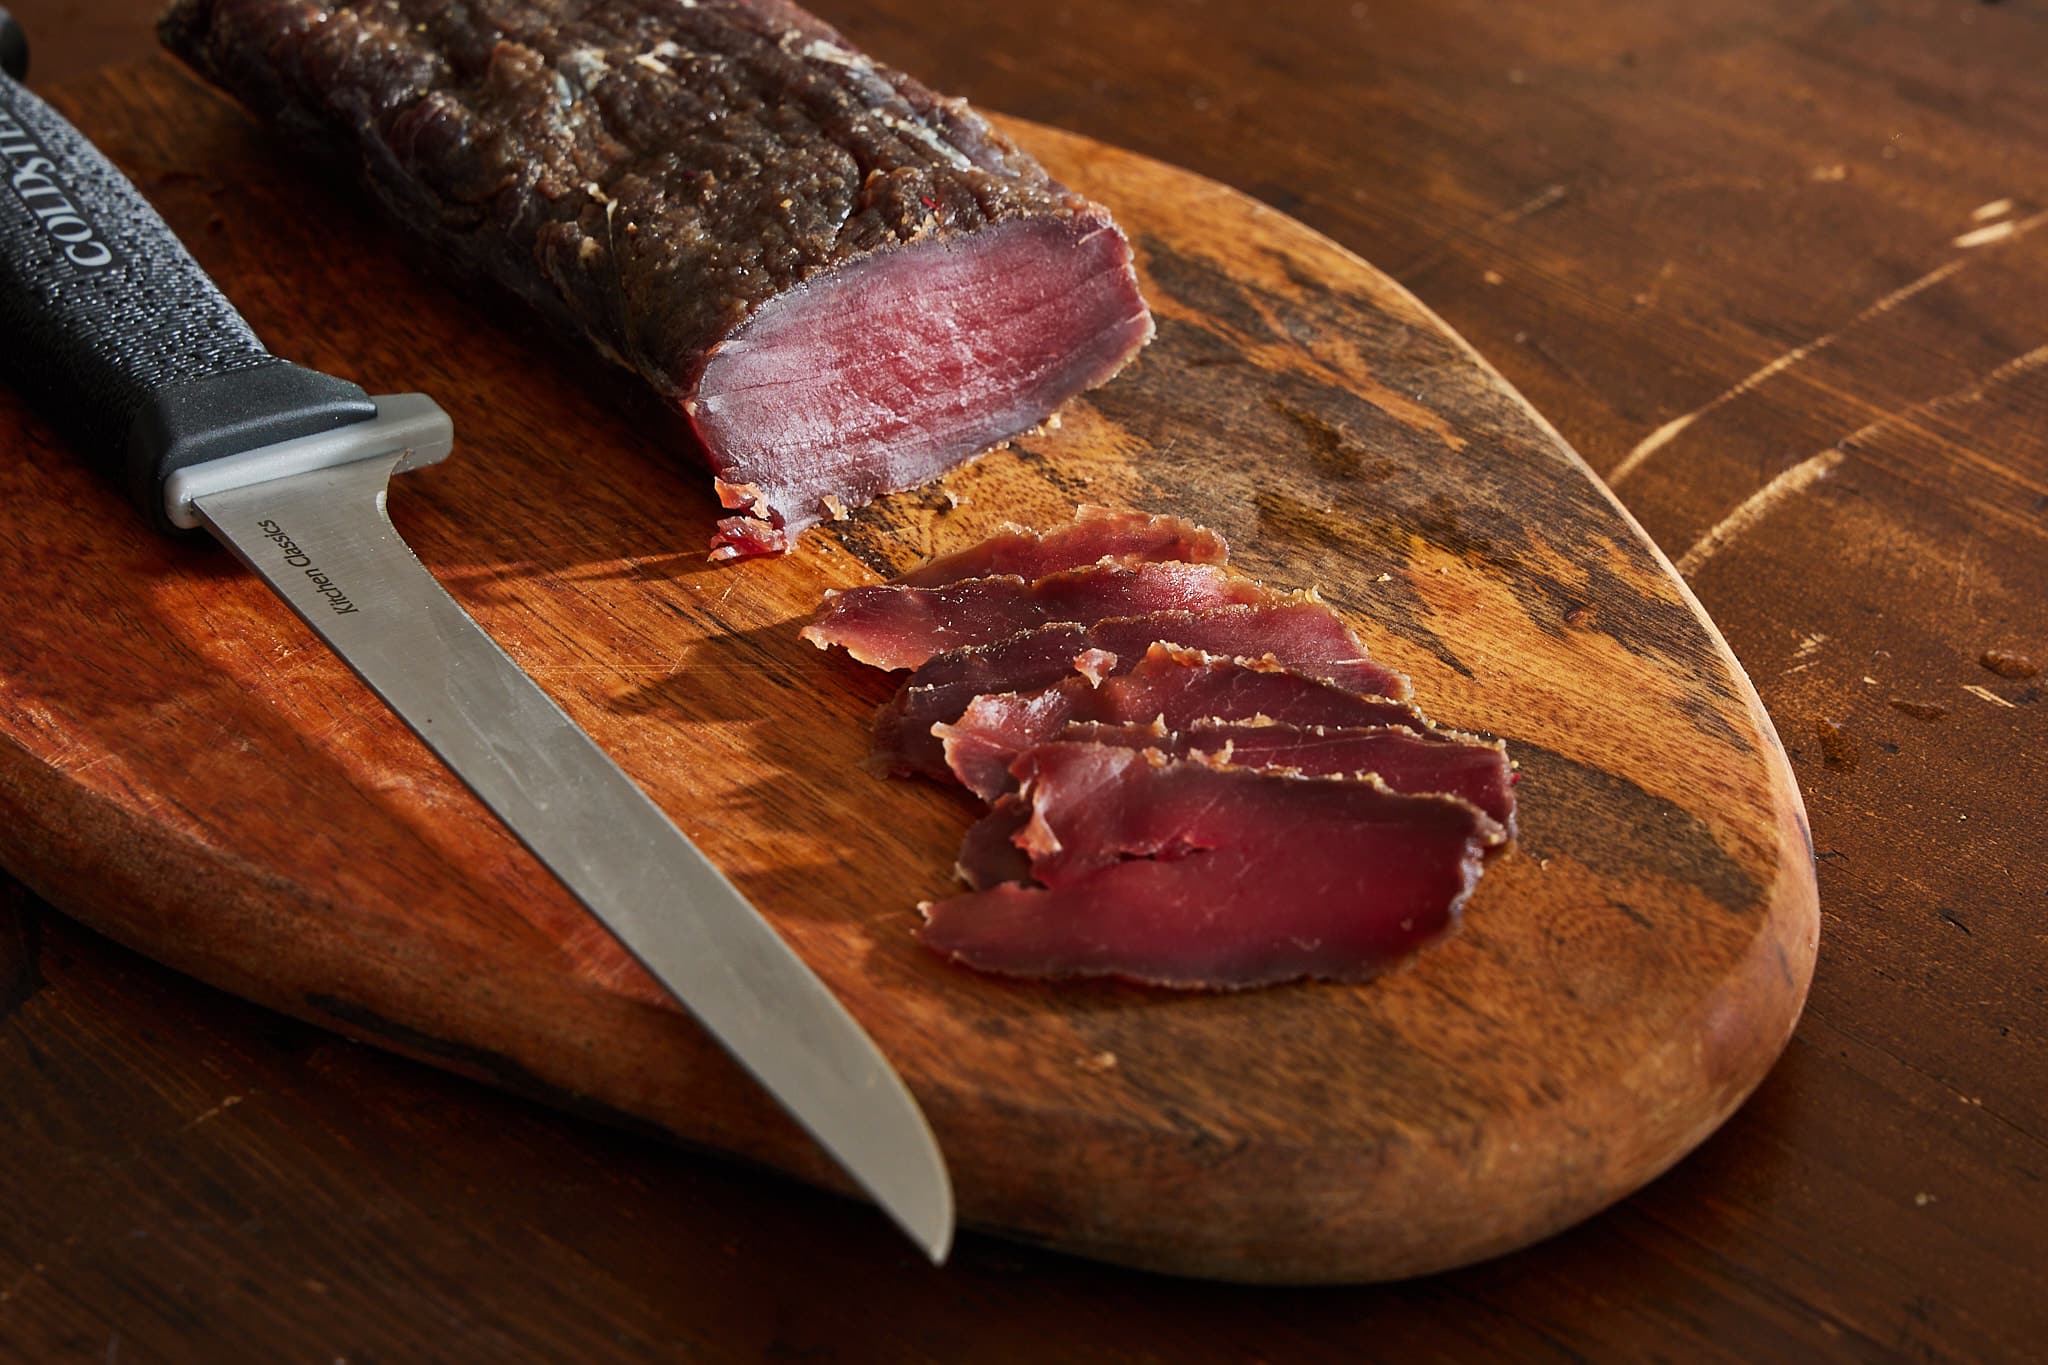 The gravlax cured venison loin recipe is one that's sure to impress.